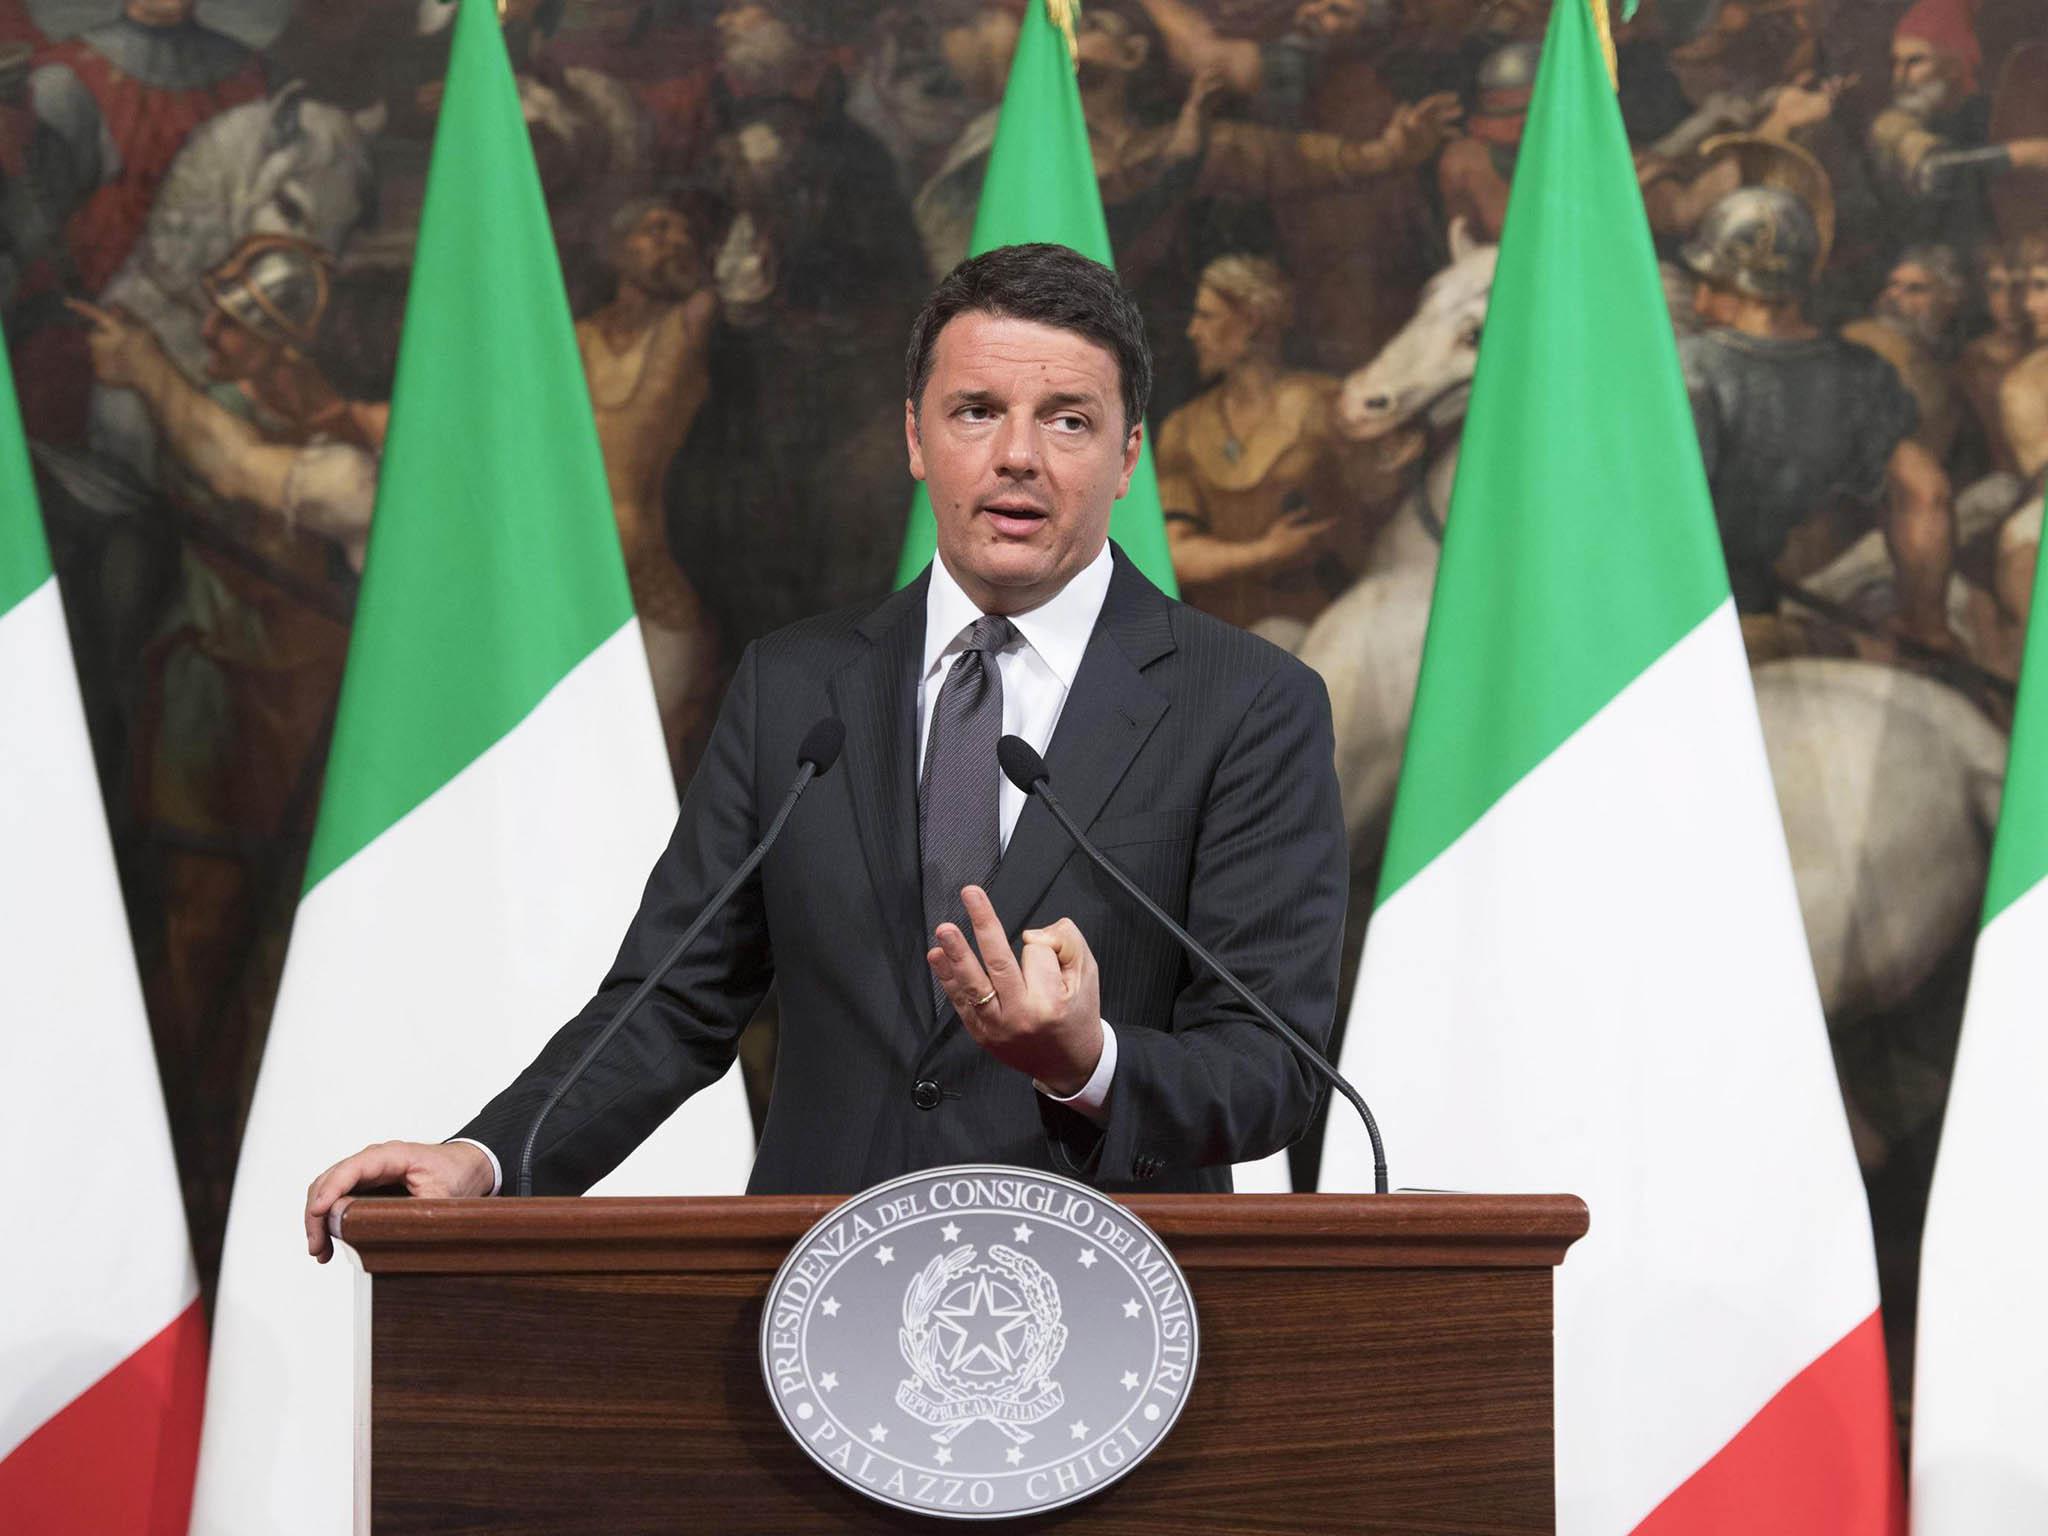 Polls indicate that over half of Italians intending to vote view the referendum as a judgement on the Renzi government and not the reform